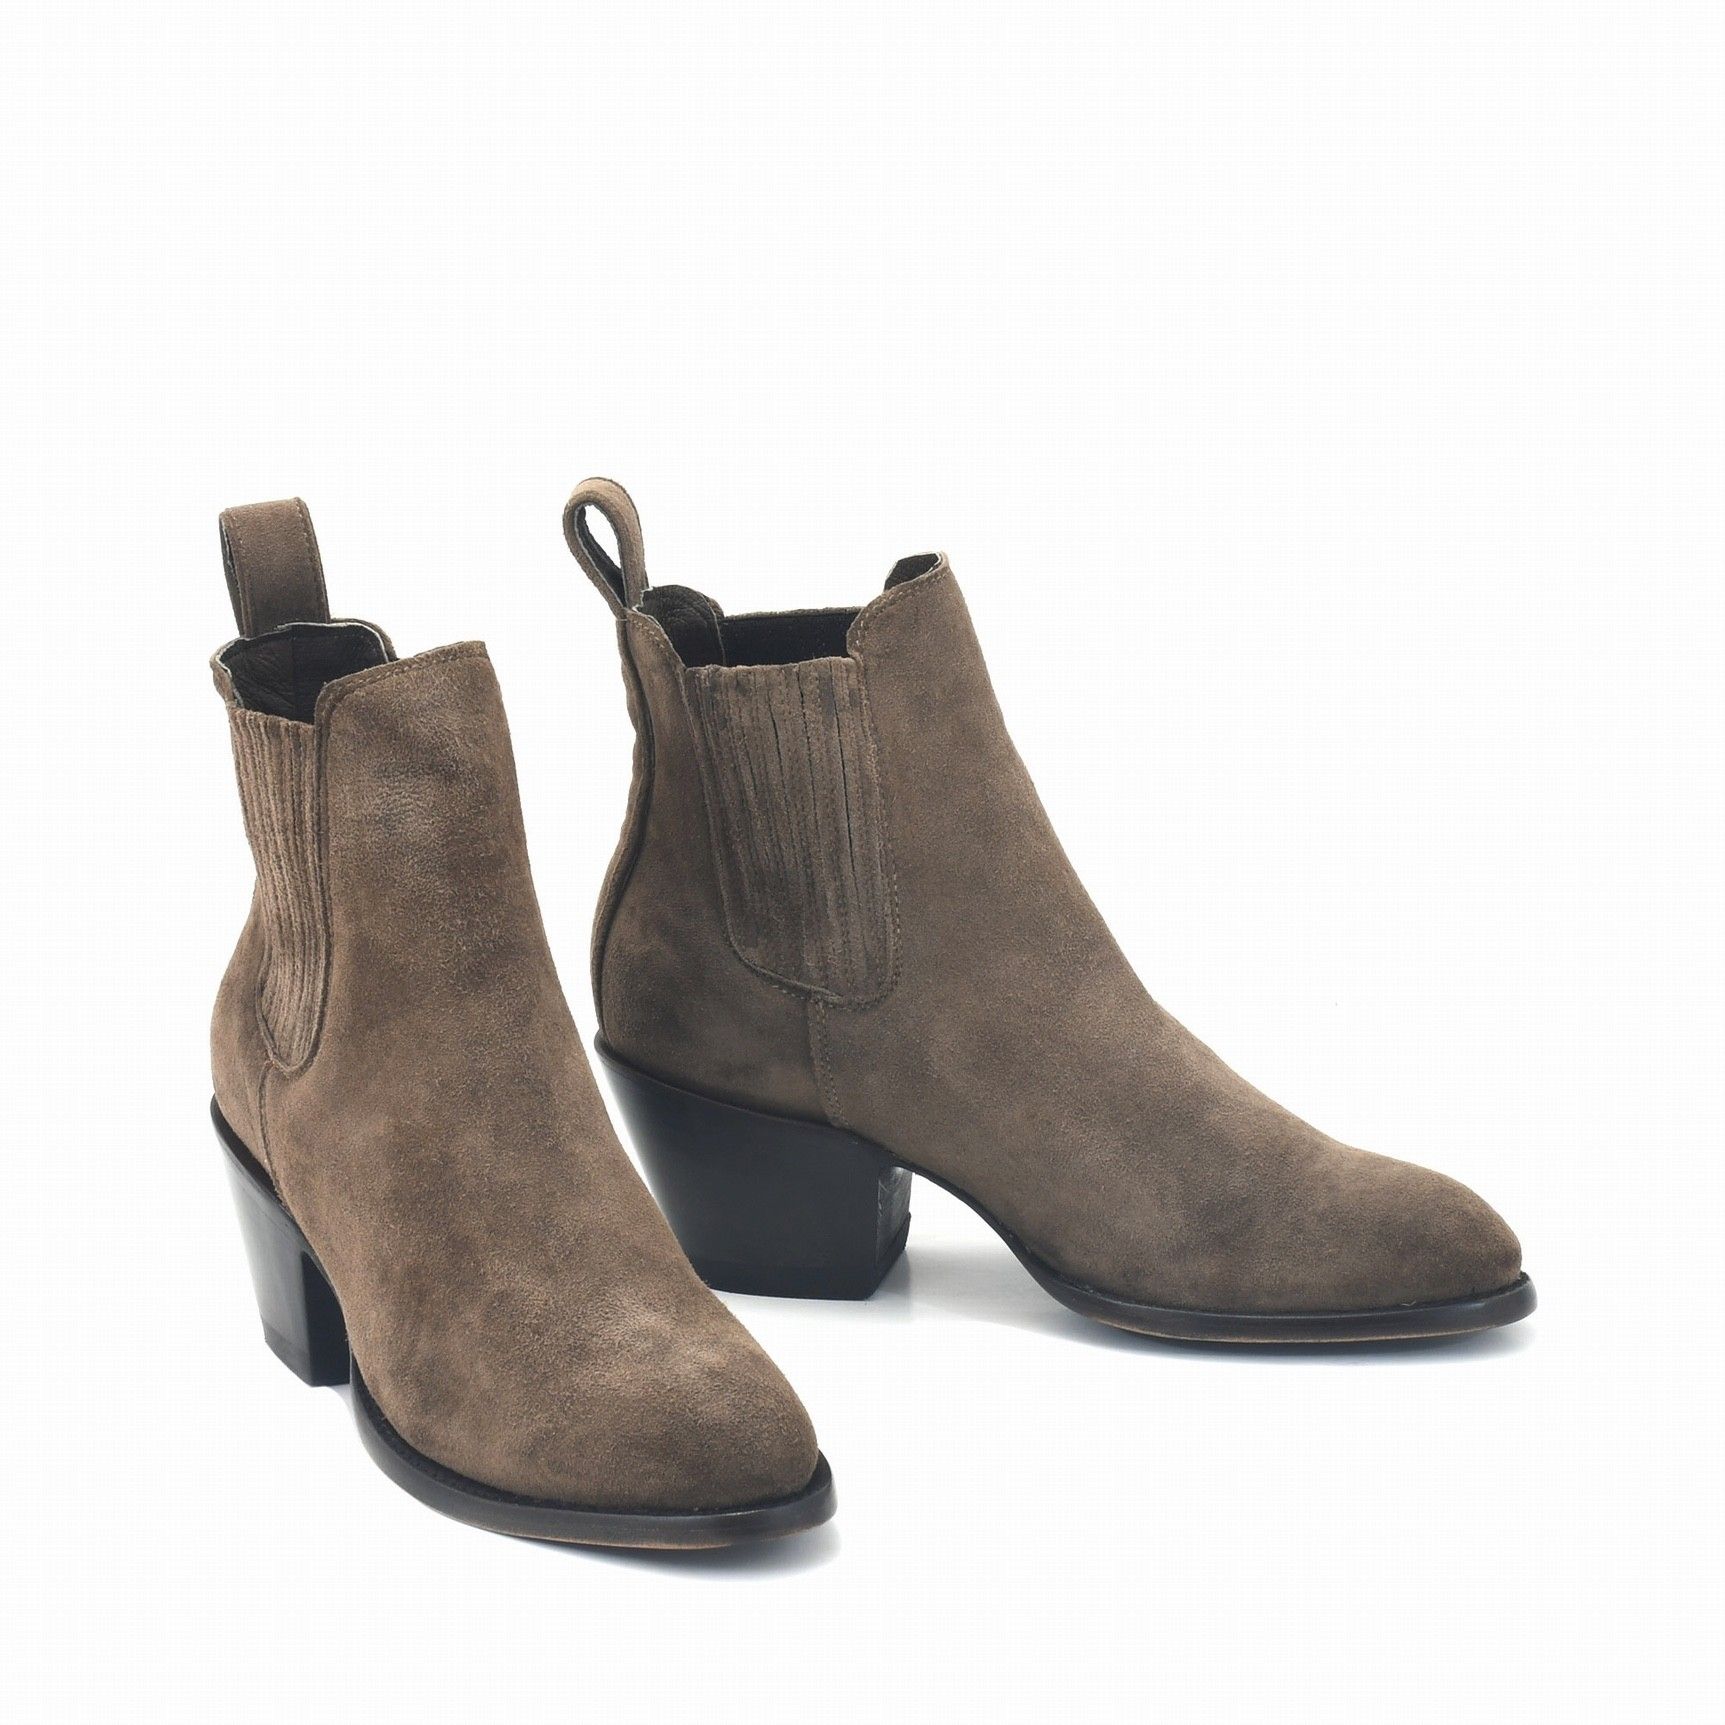 ESTUDIO BROWN SUEDE ROUNDED TOE ANKLE BOOTS FEATURING  ELASTICIZED SIDES COVERED WITH LEATHER  Total heel height 2.6 Inches  100